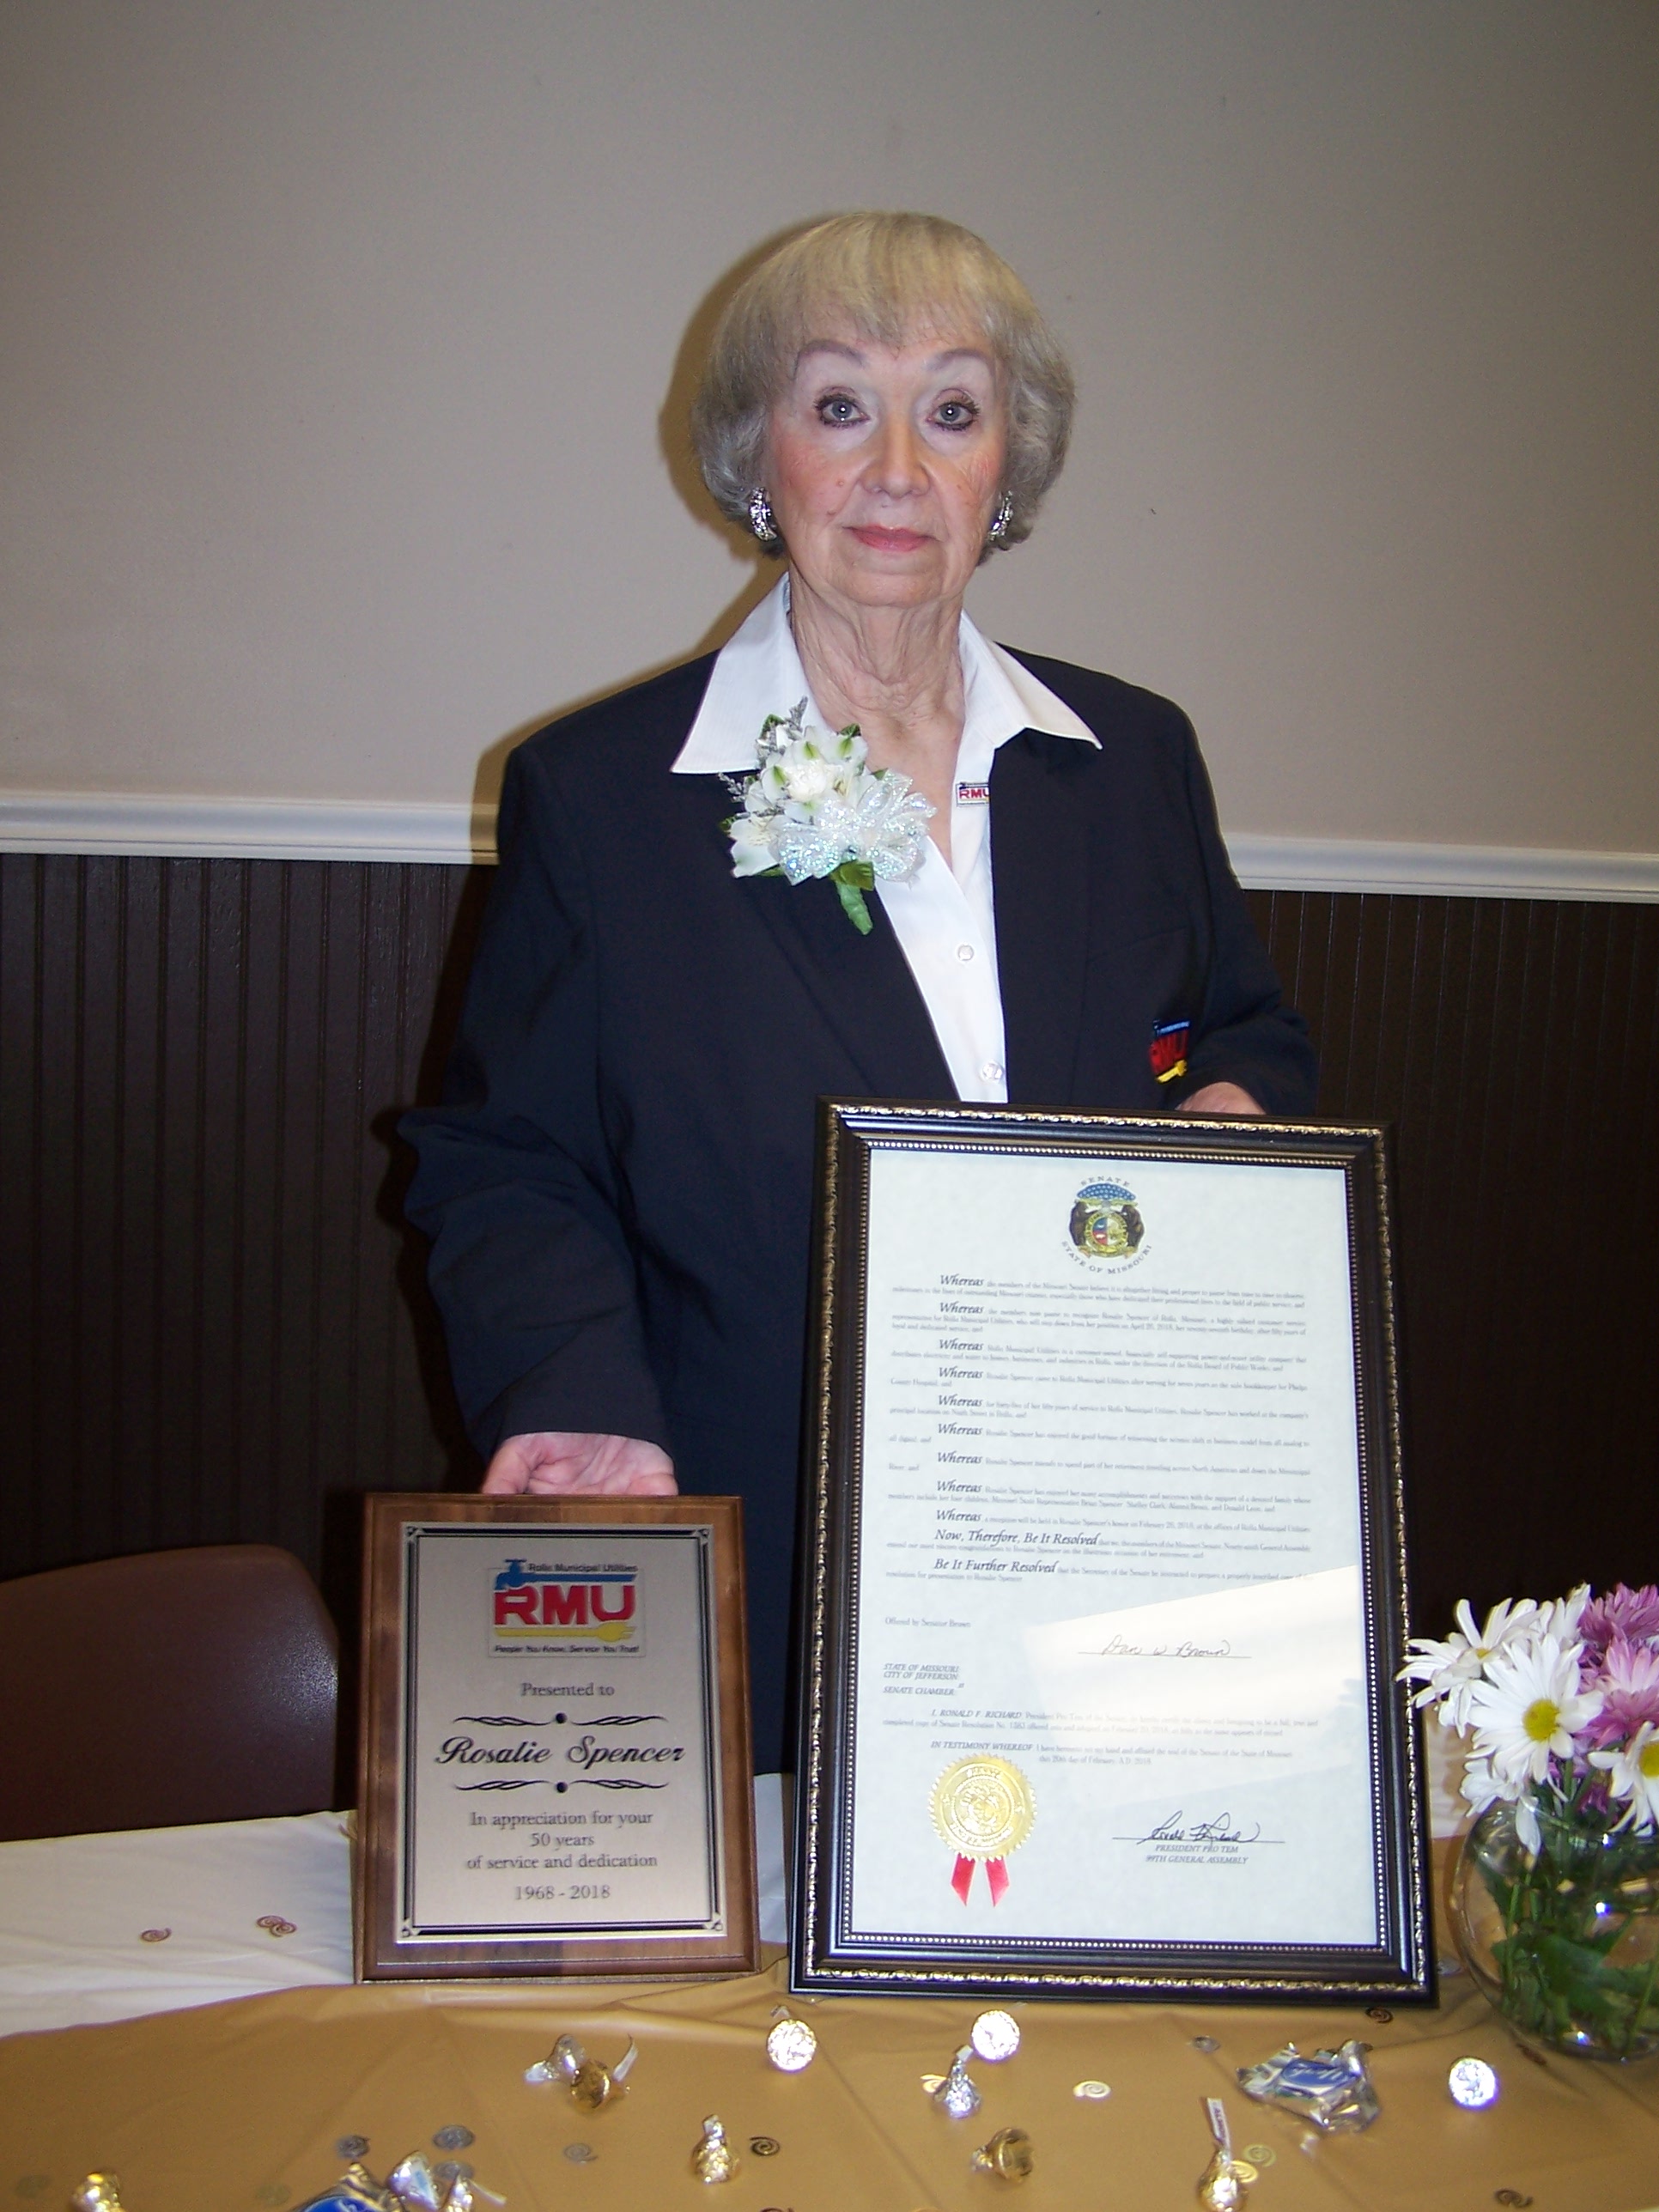 Rosalie with her appreciation plaque and her charter from the city.